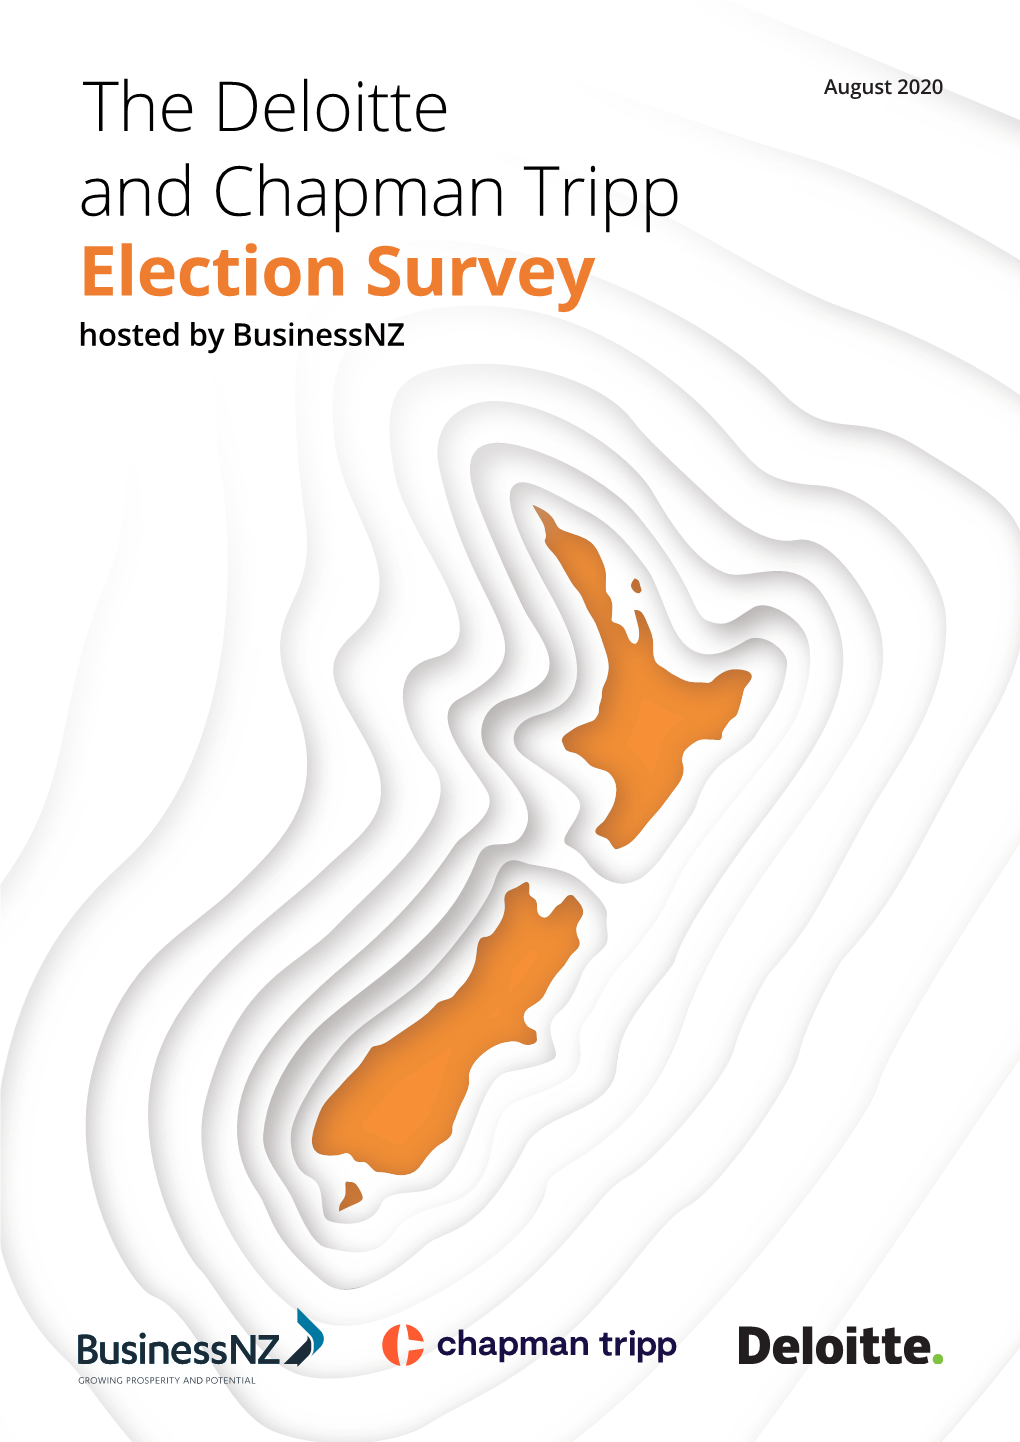 The Deloitte and Chapman Tripp Election Survey, Hosted by Businessnz, Is the Leading Survey of Opinion on Business Issues for the 2020 General Election